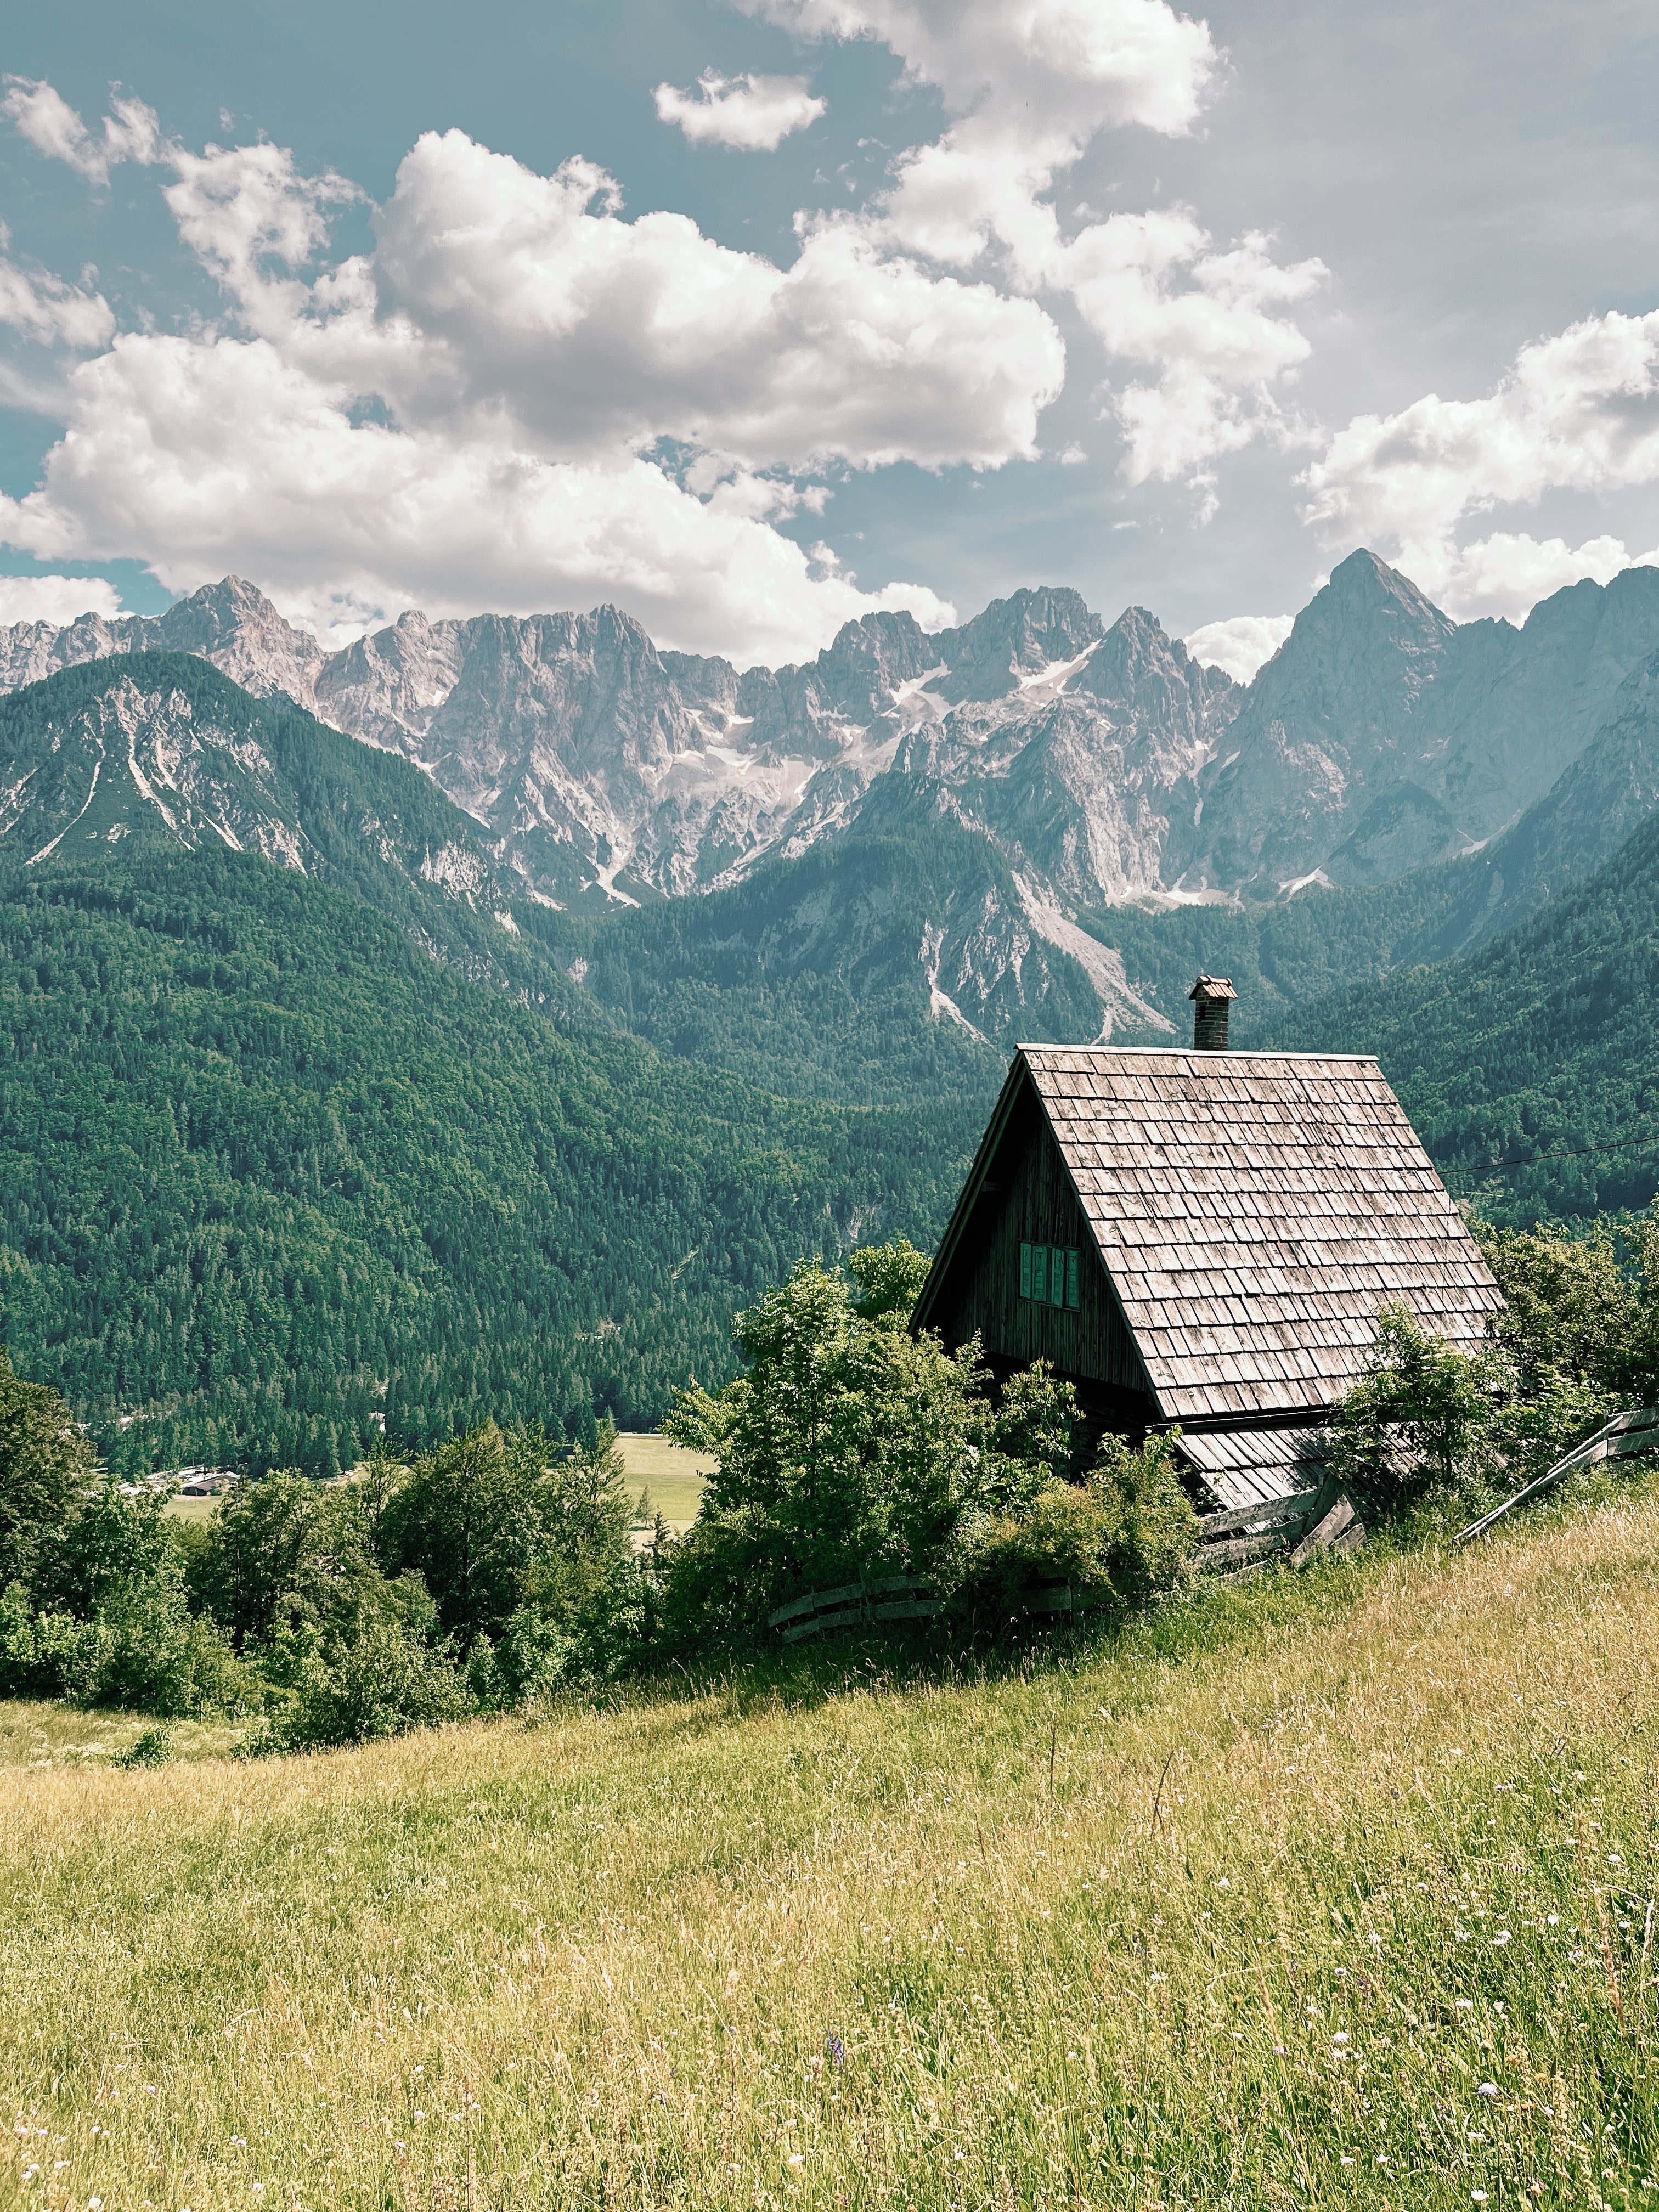 Mountain hut in front of Julian Alps while hiking the Alpe Adria Trail